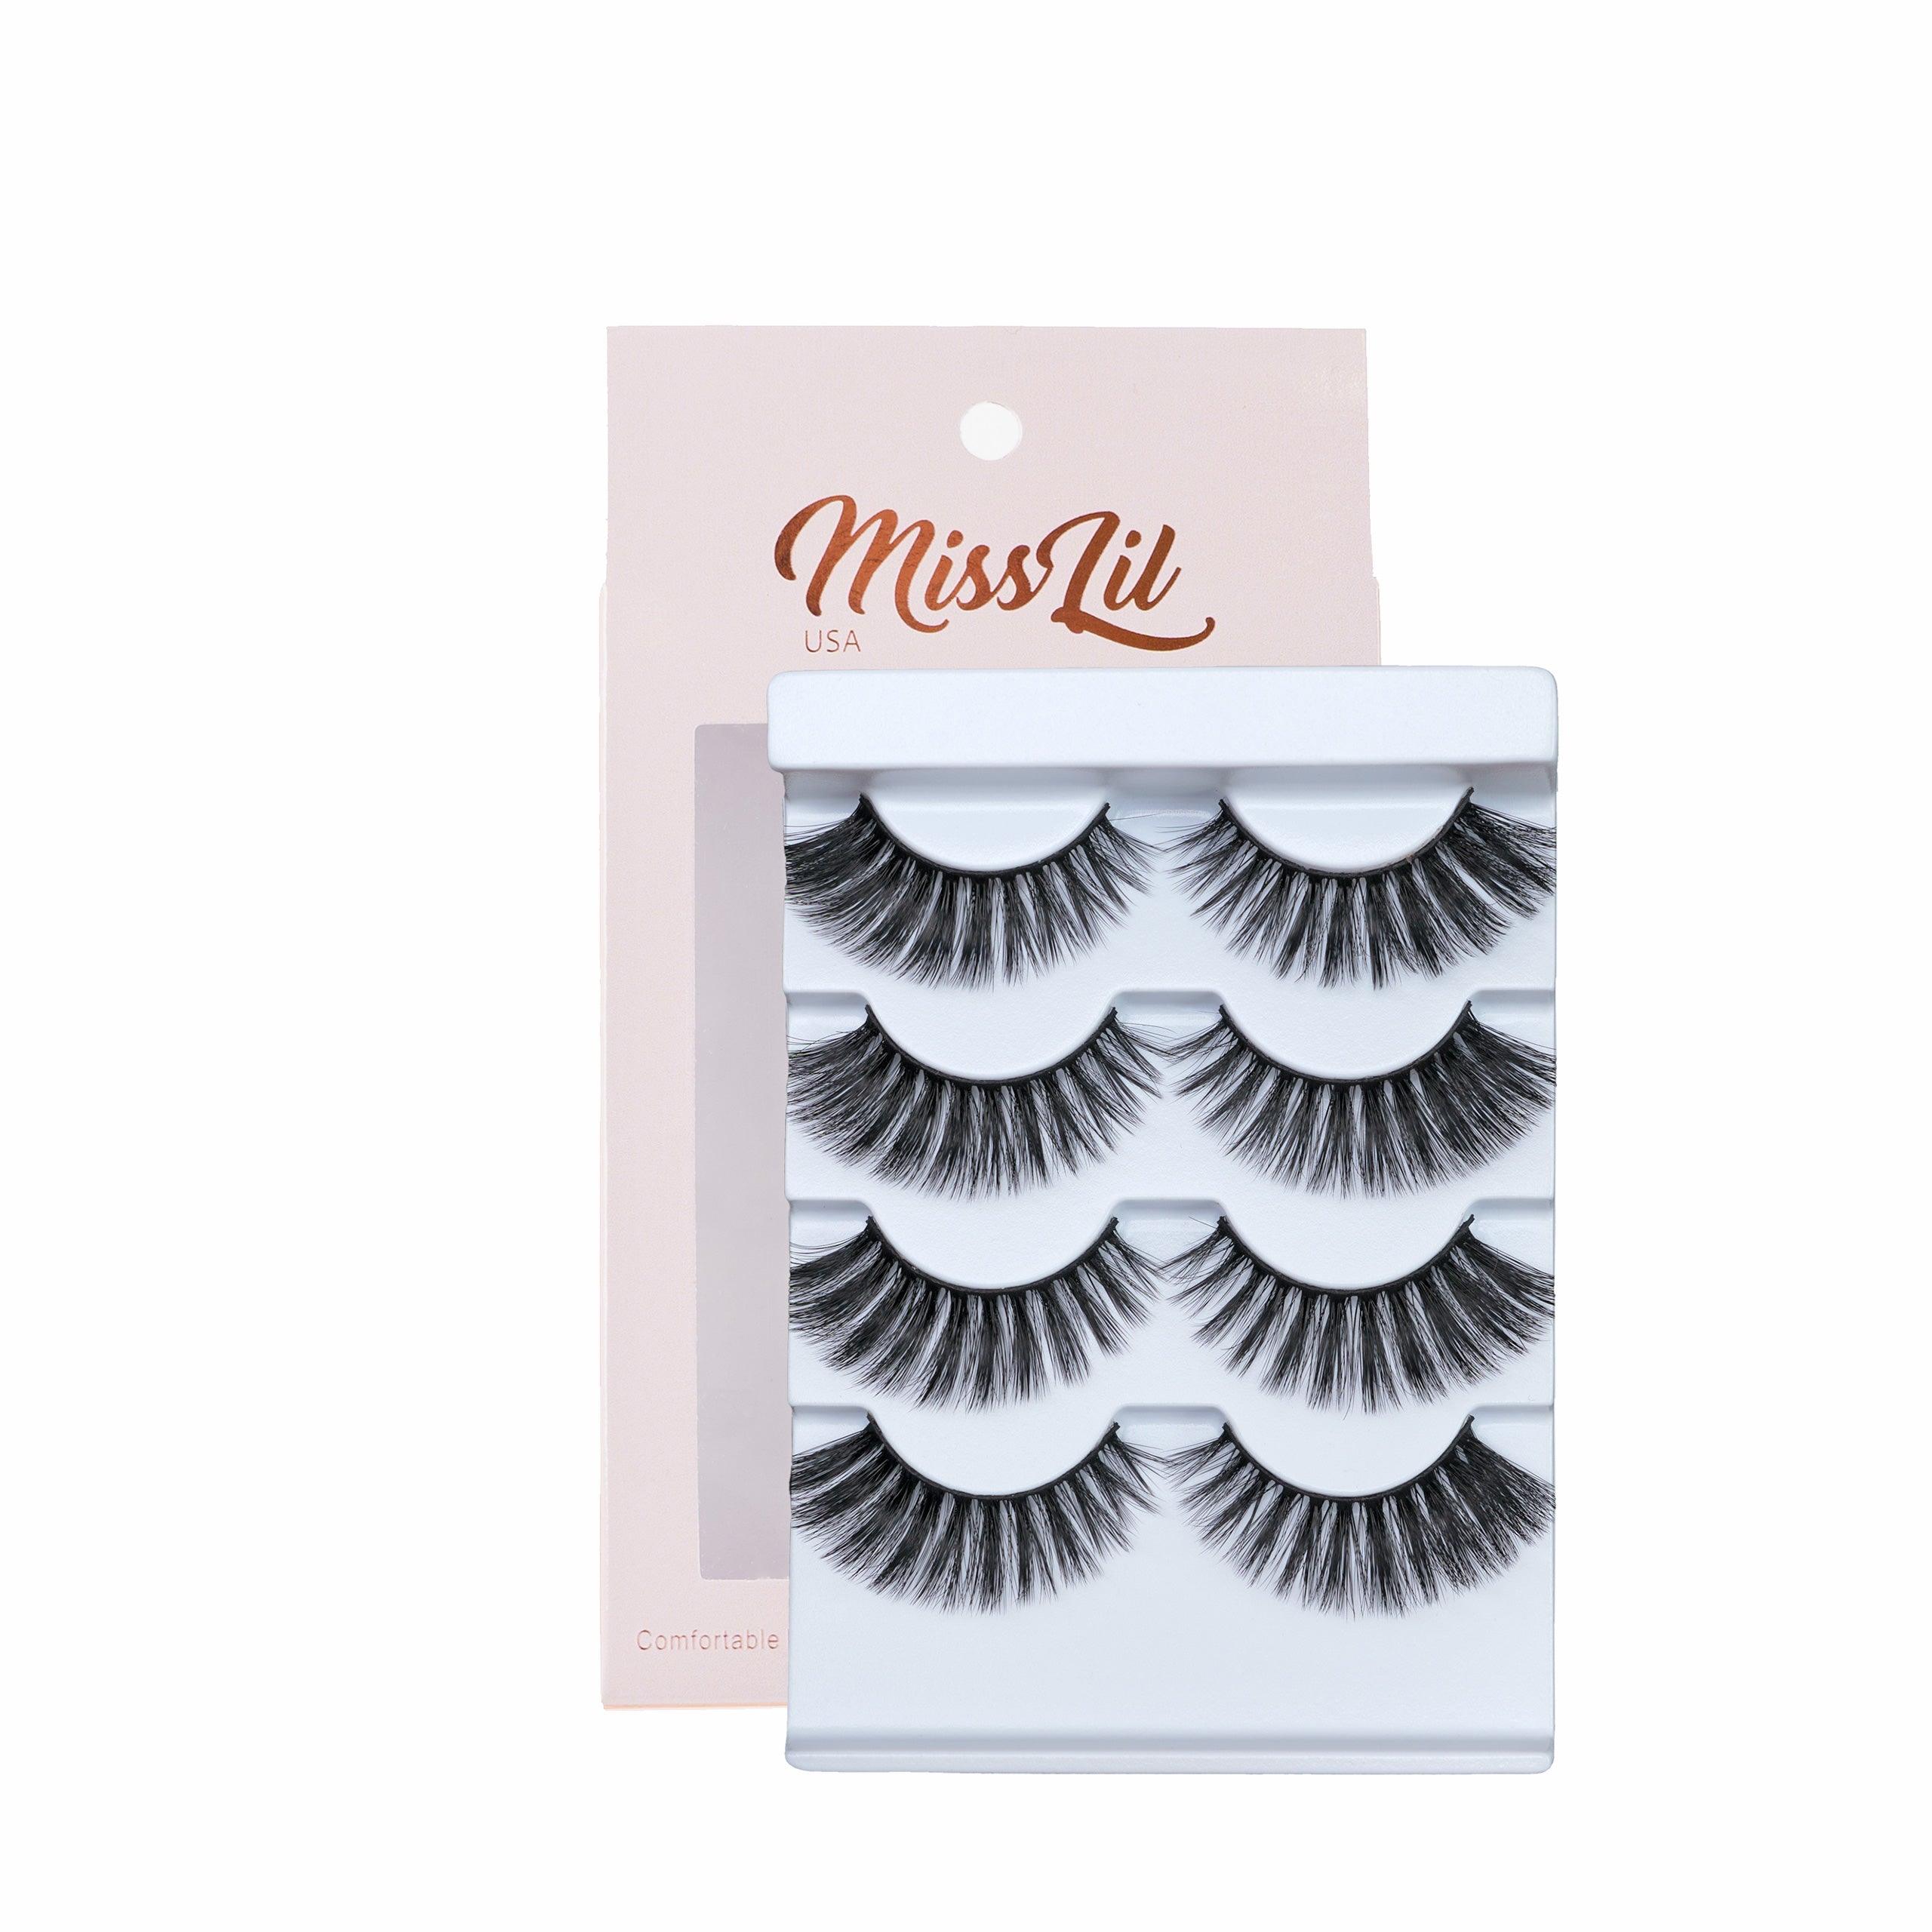 4 Pairs Lashes - Classic Collection #30 - Miss Lil USA